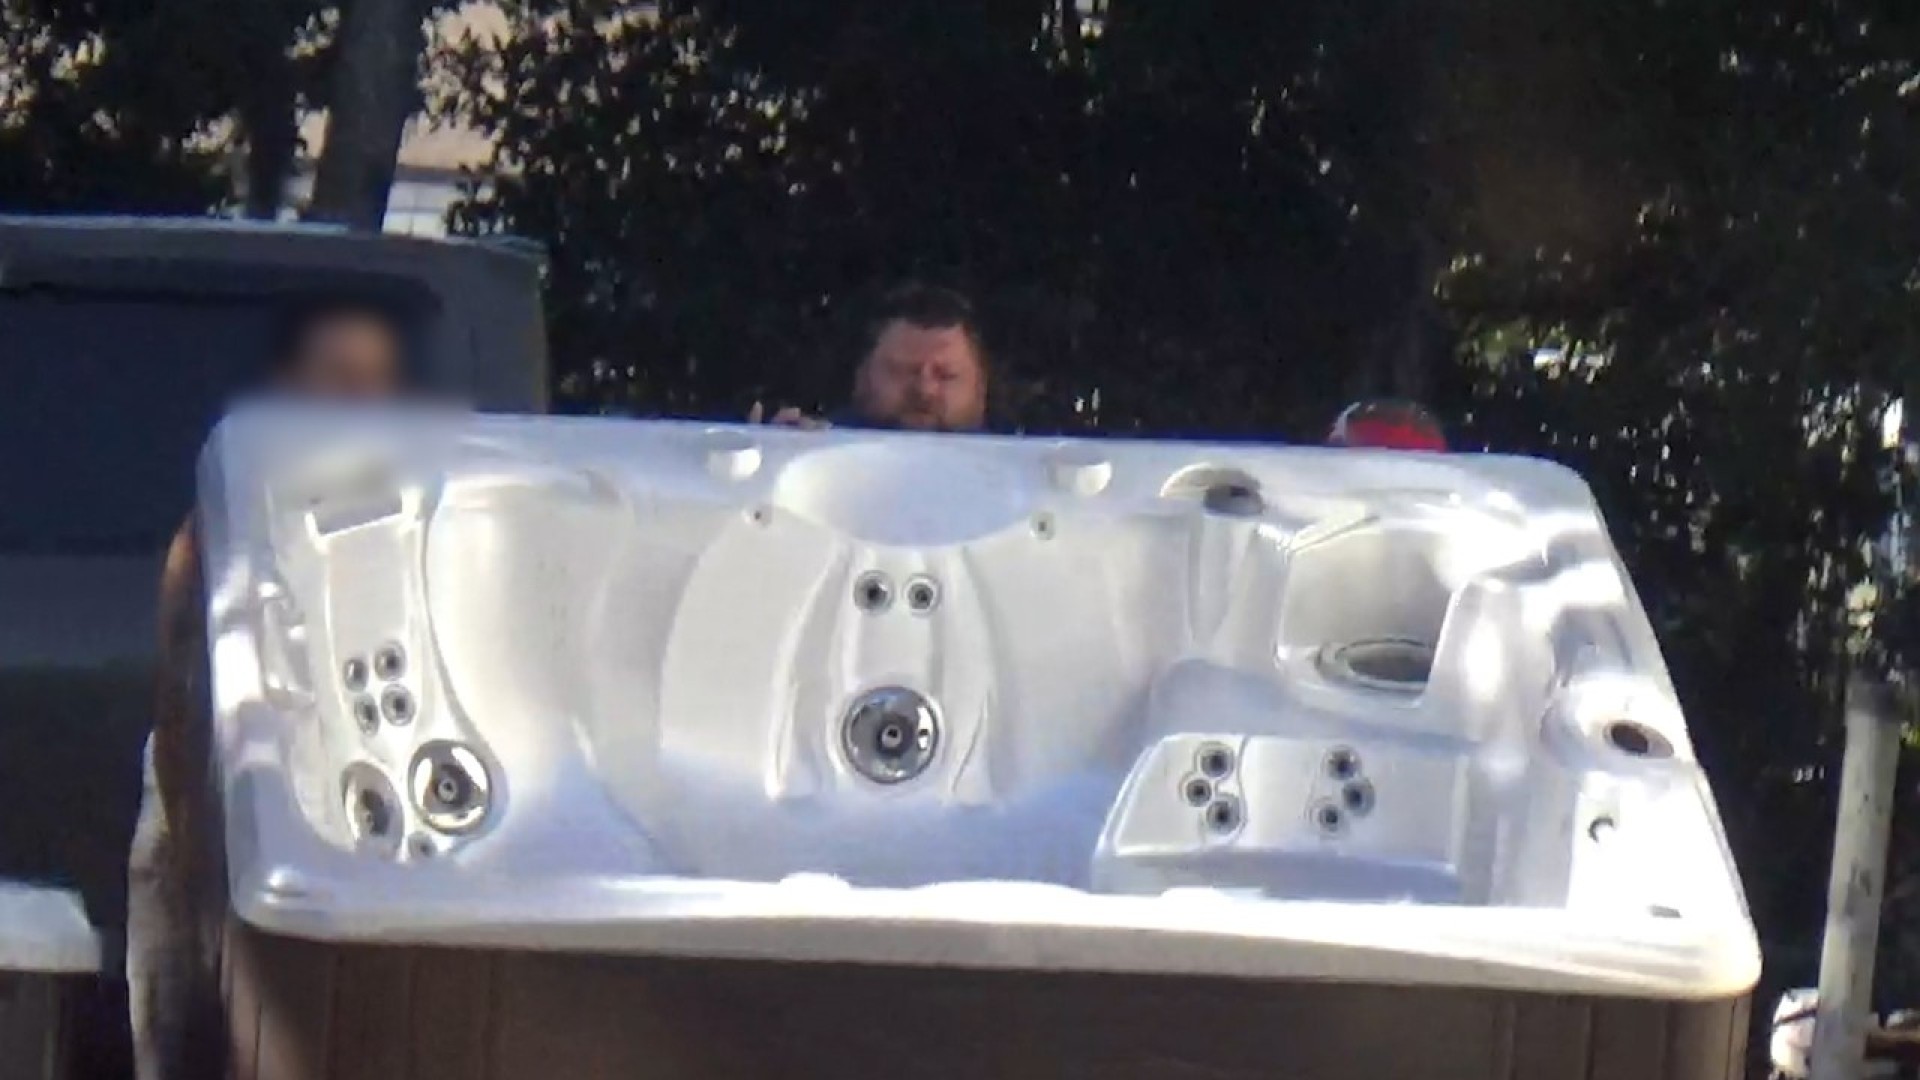 Volusia company sold defective hot tubs on Facebook, customers claim